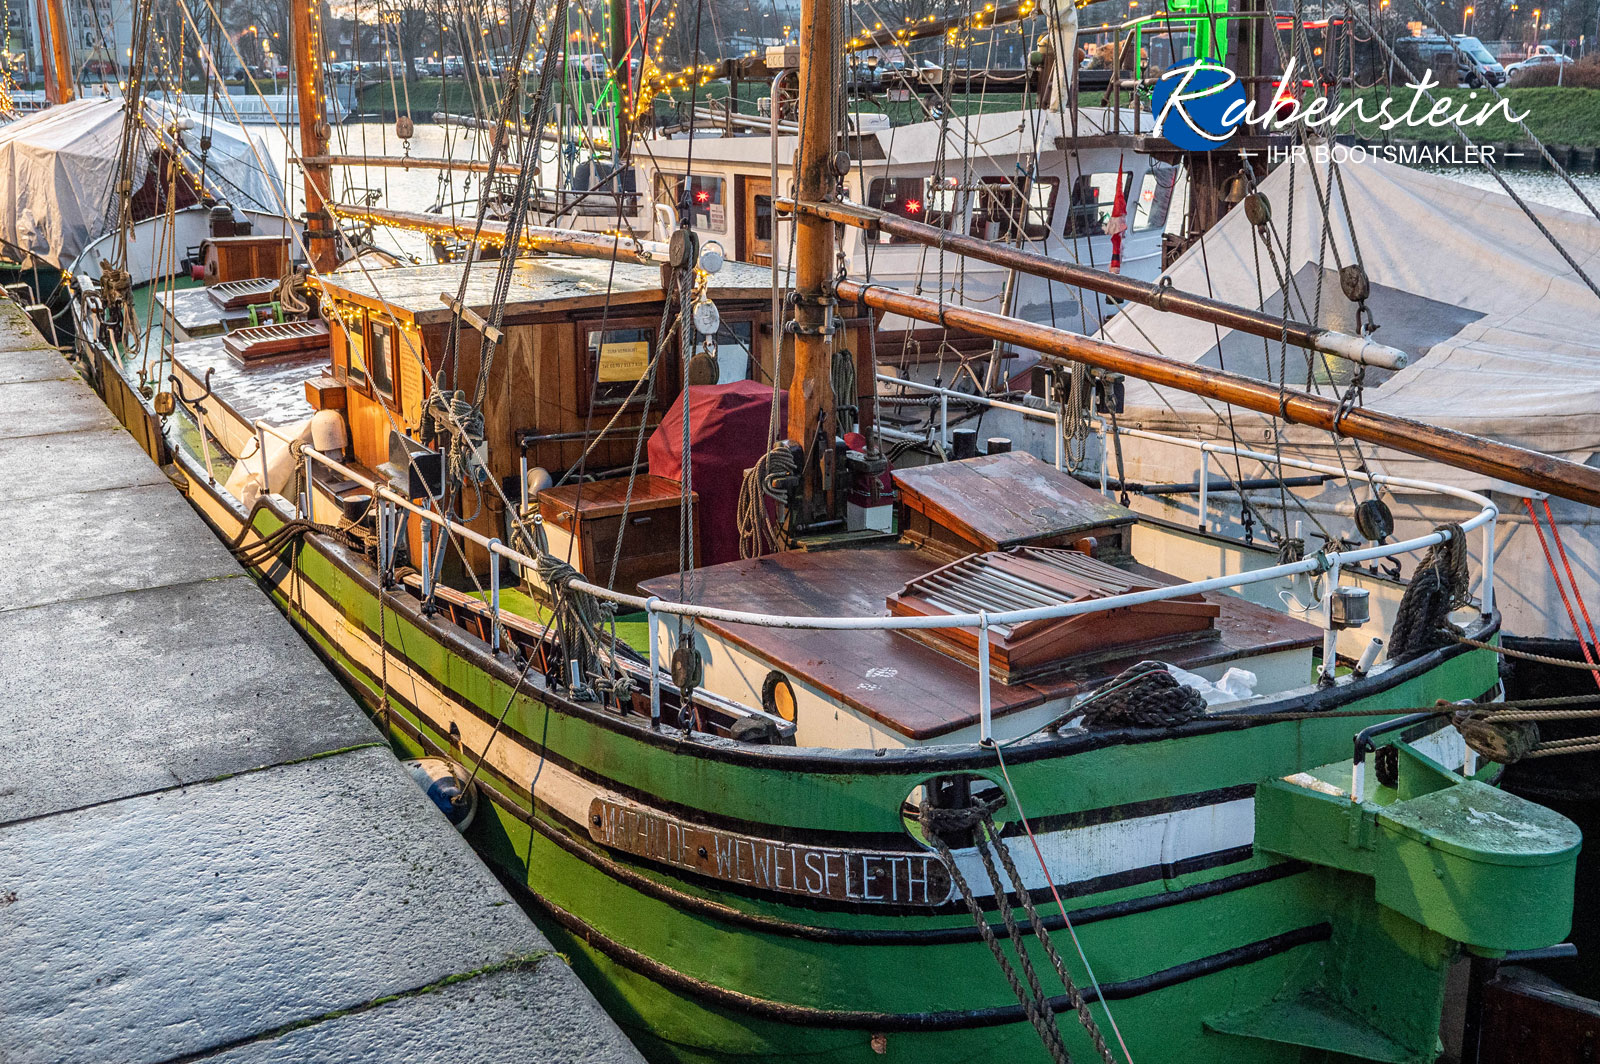 The traditional ship Mathilde is for sale